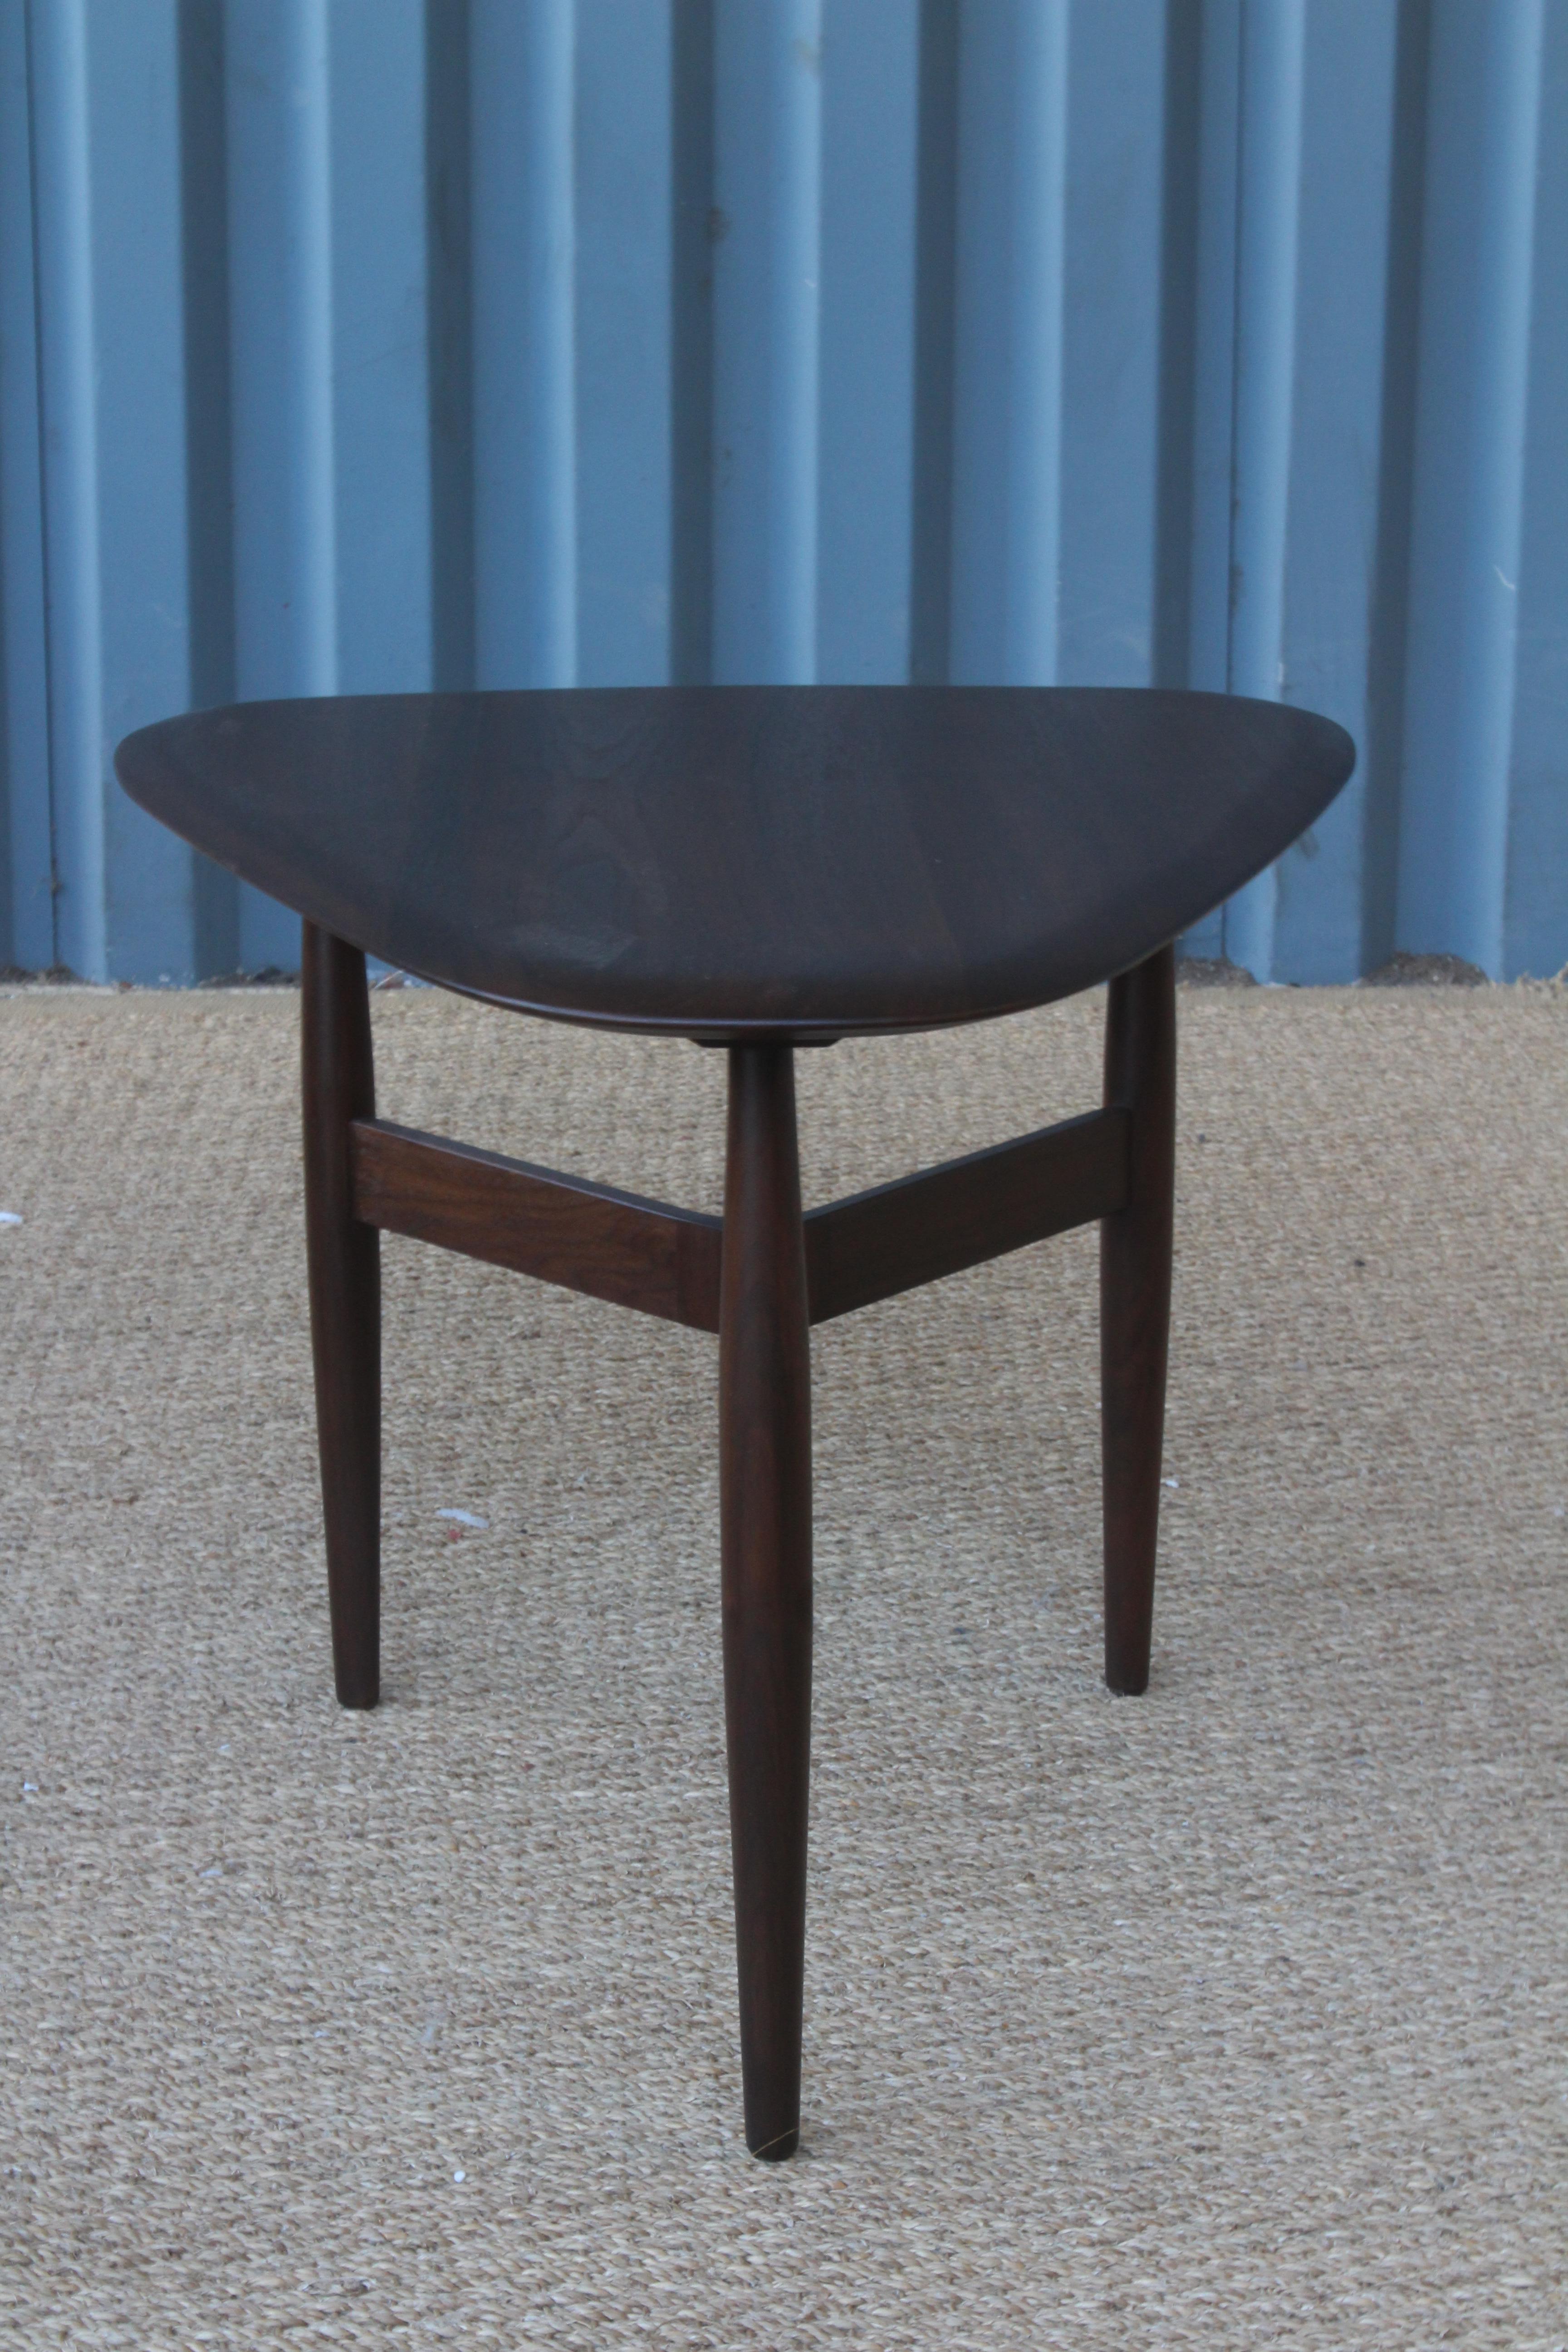 Solid walnut side table designed by John Keal for Brown Saltman in the 1950s. Recently refinished and in wonderful condition.